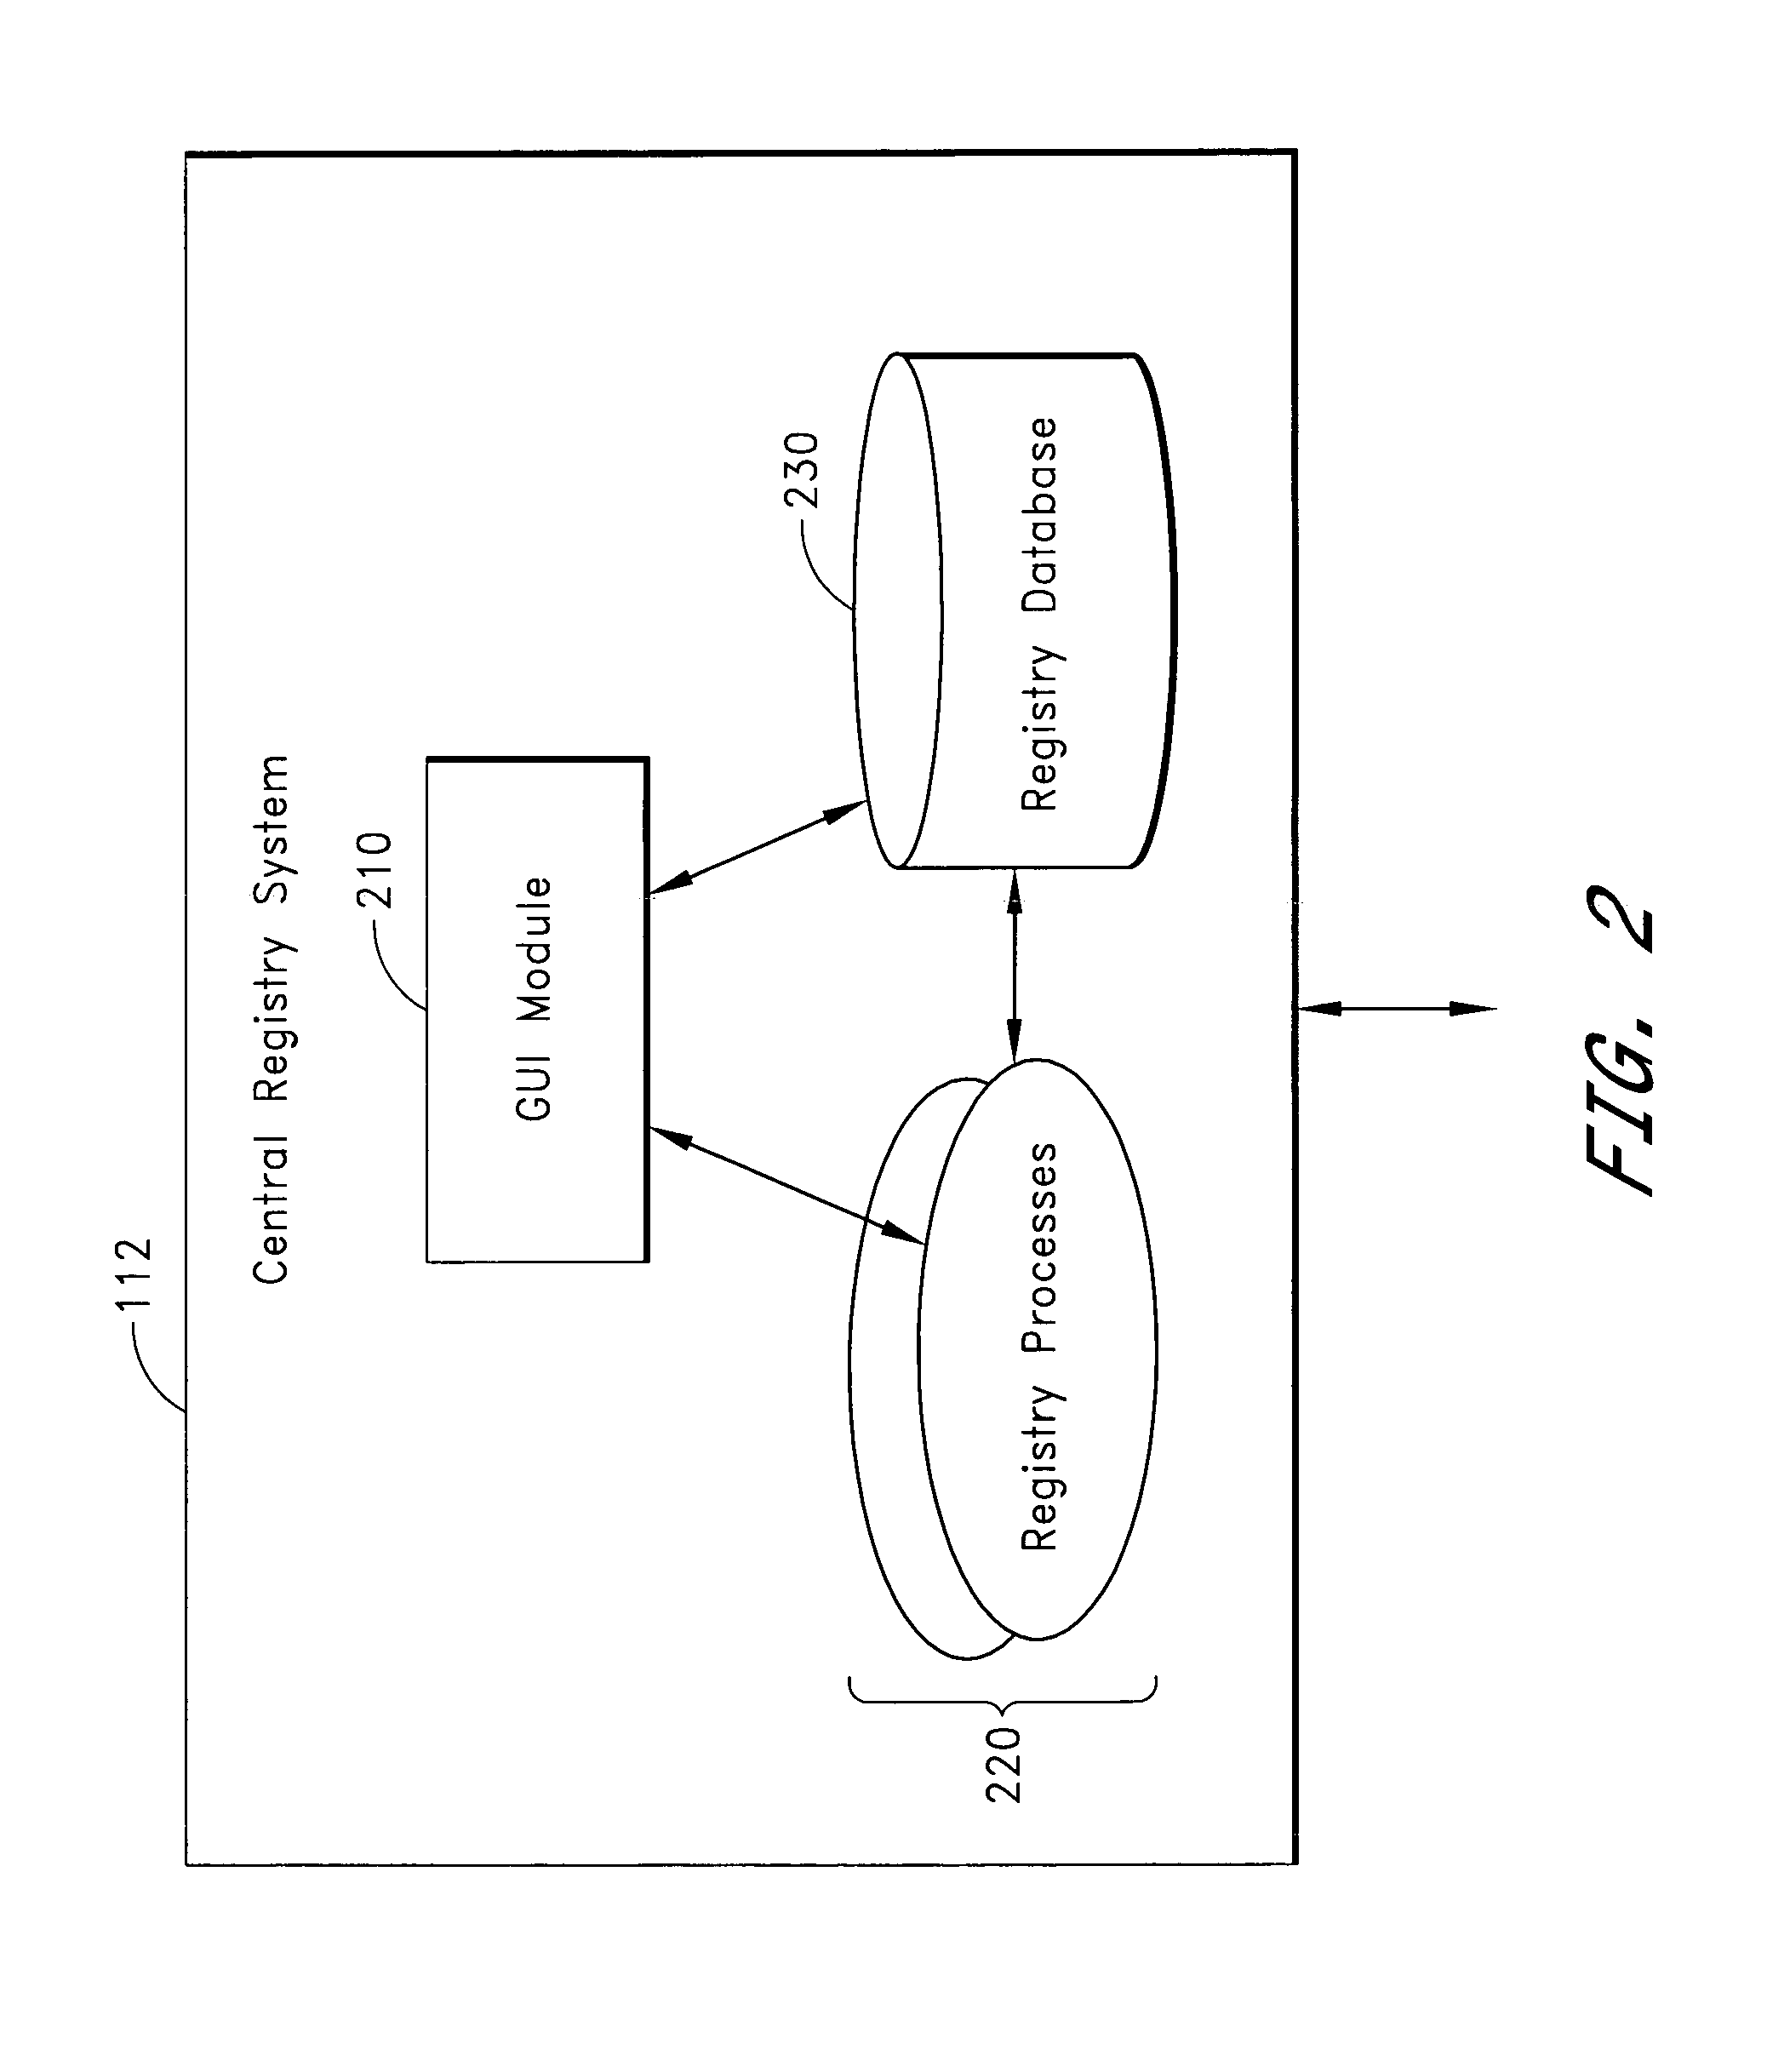 Systems and methods for providing centralized management of heterogeneous distributed enterprise application integration objects